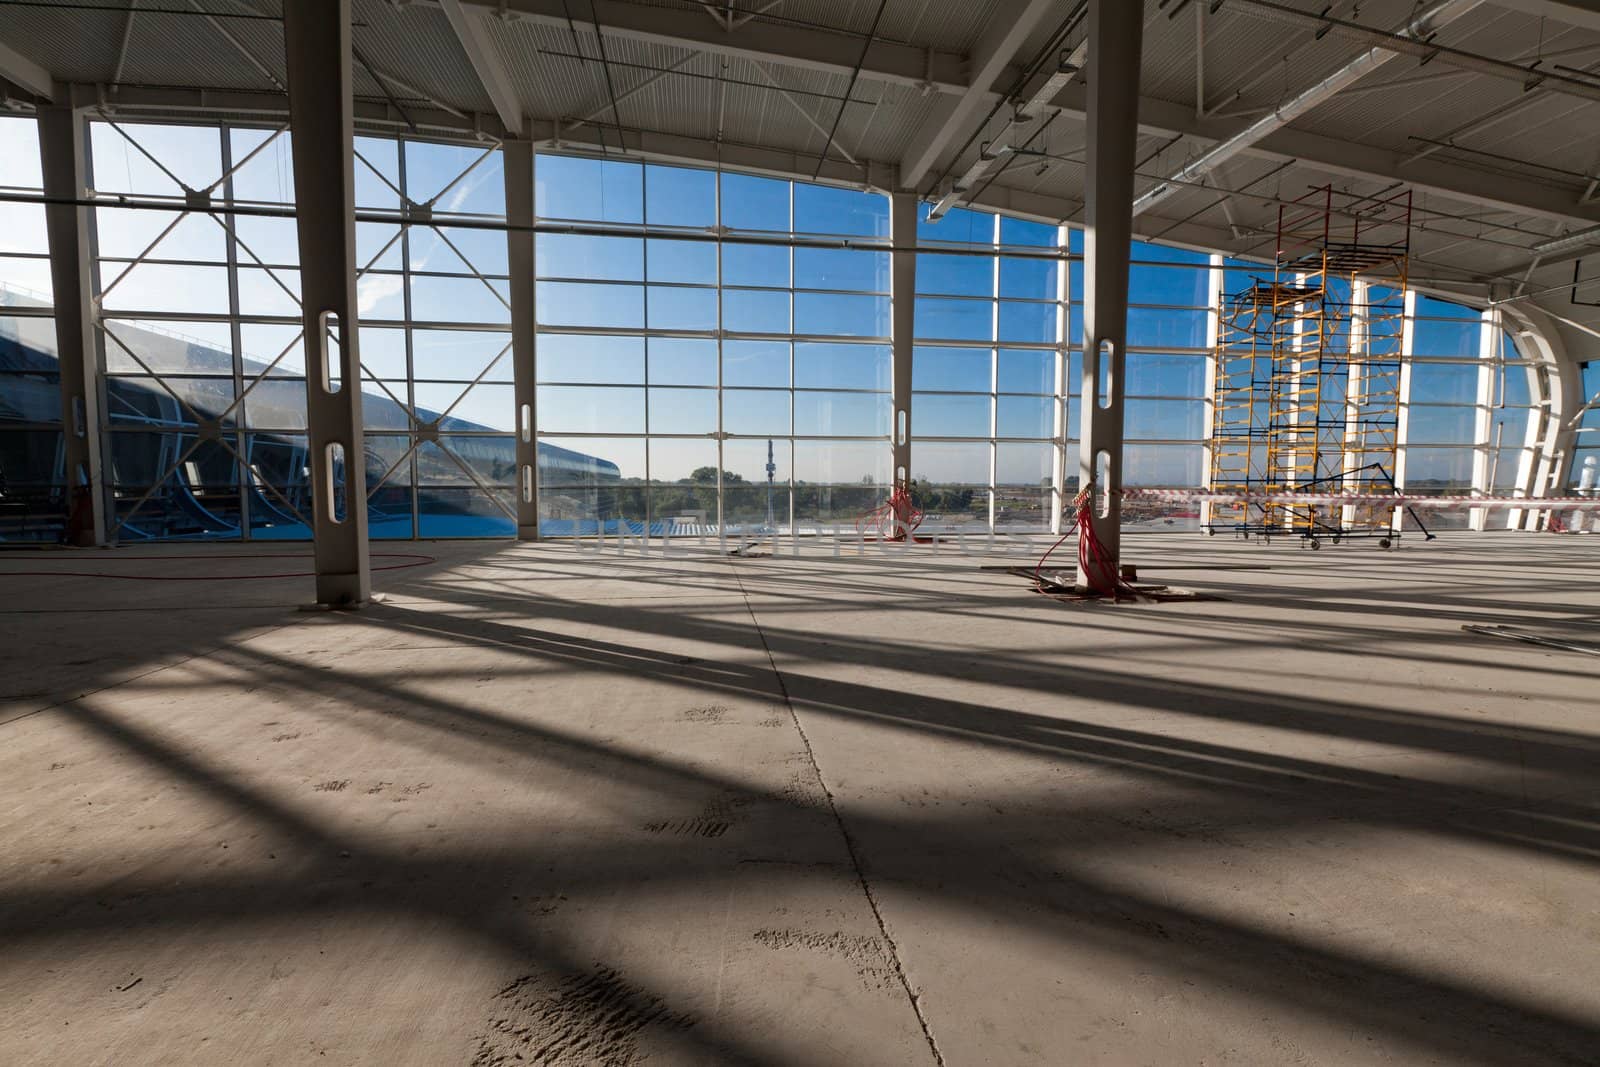 New unfinished building of airport